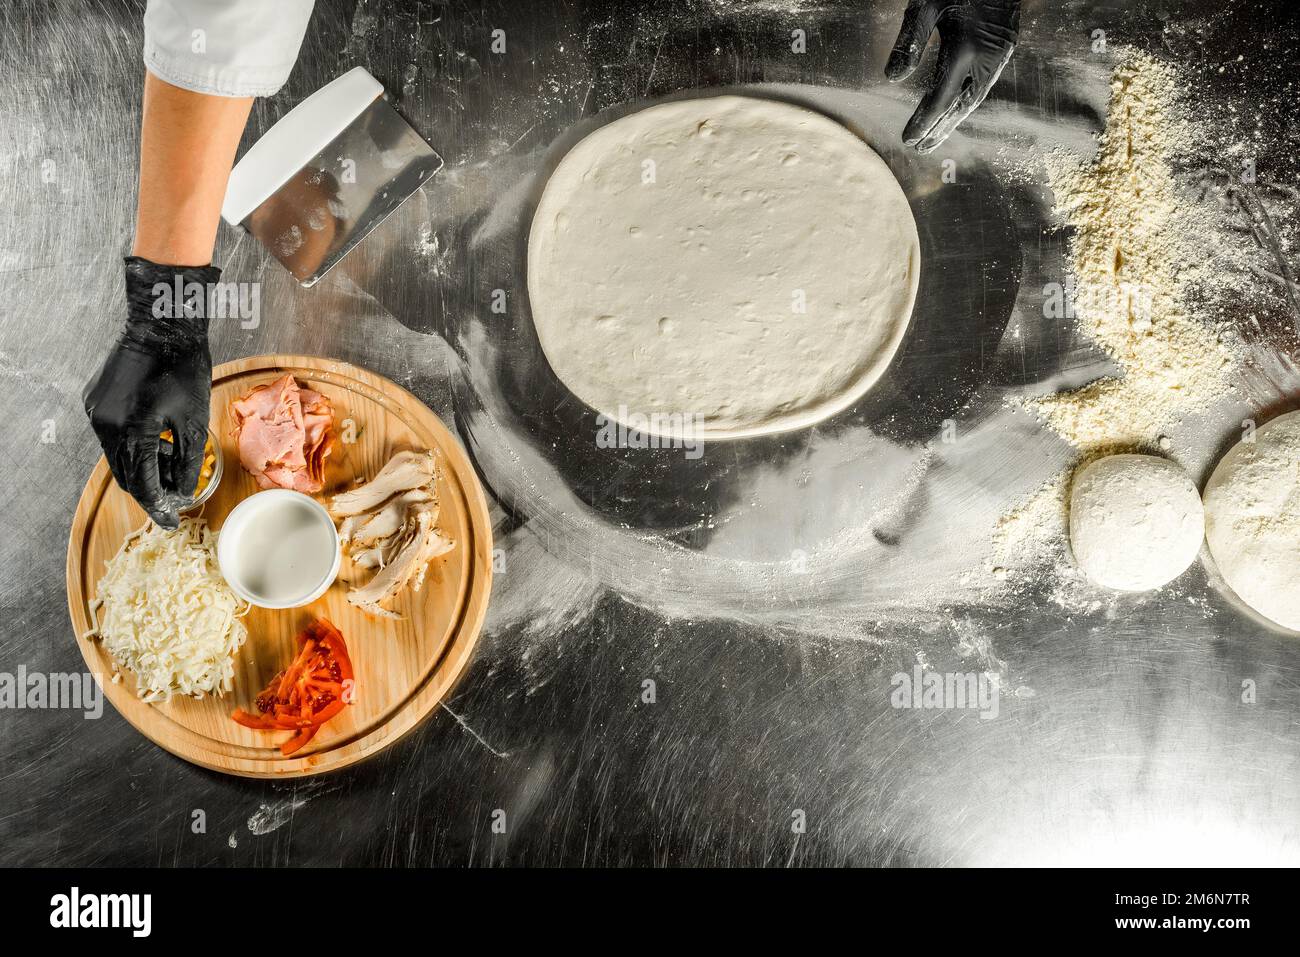 Cooking pizza on a steel table; dough, flour, pizza topping, sauce and chef`s hands in black gloves on the table Stock Photo